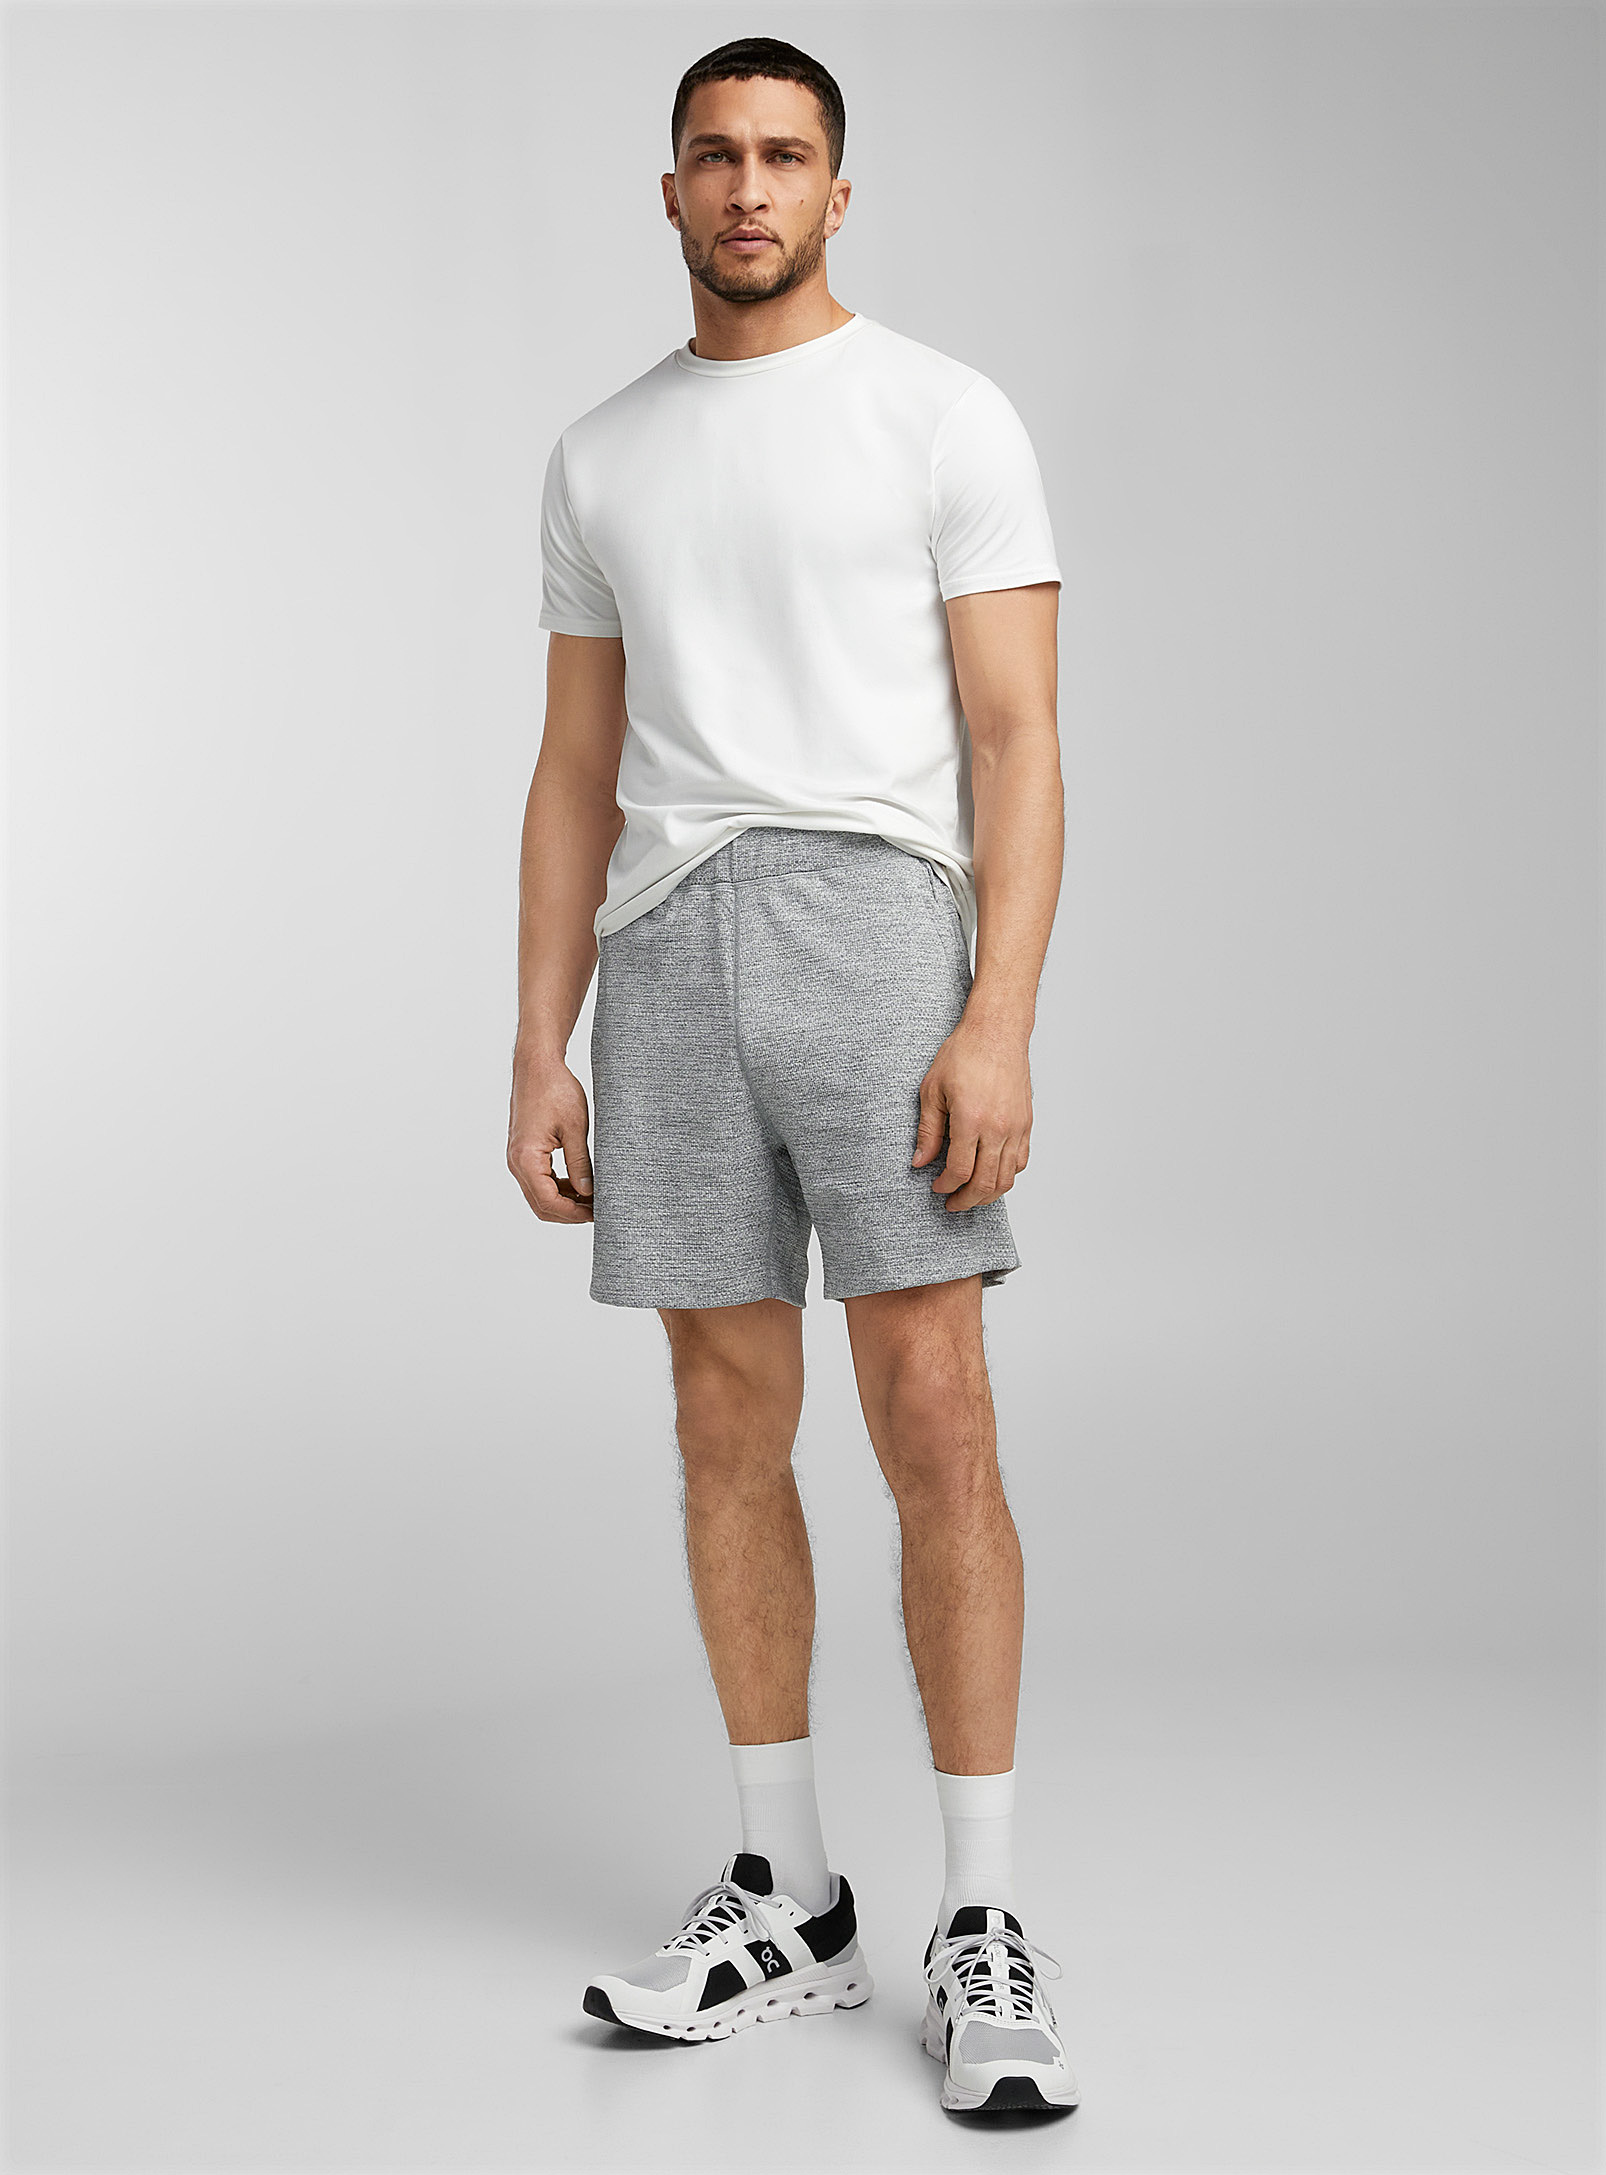 Reigning Champ - Men's Solotex breathable jersey short